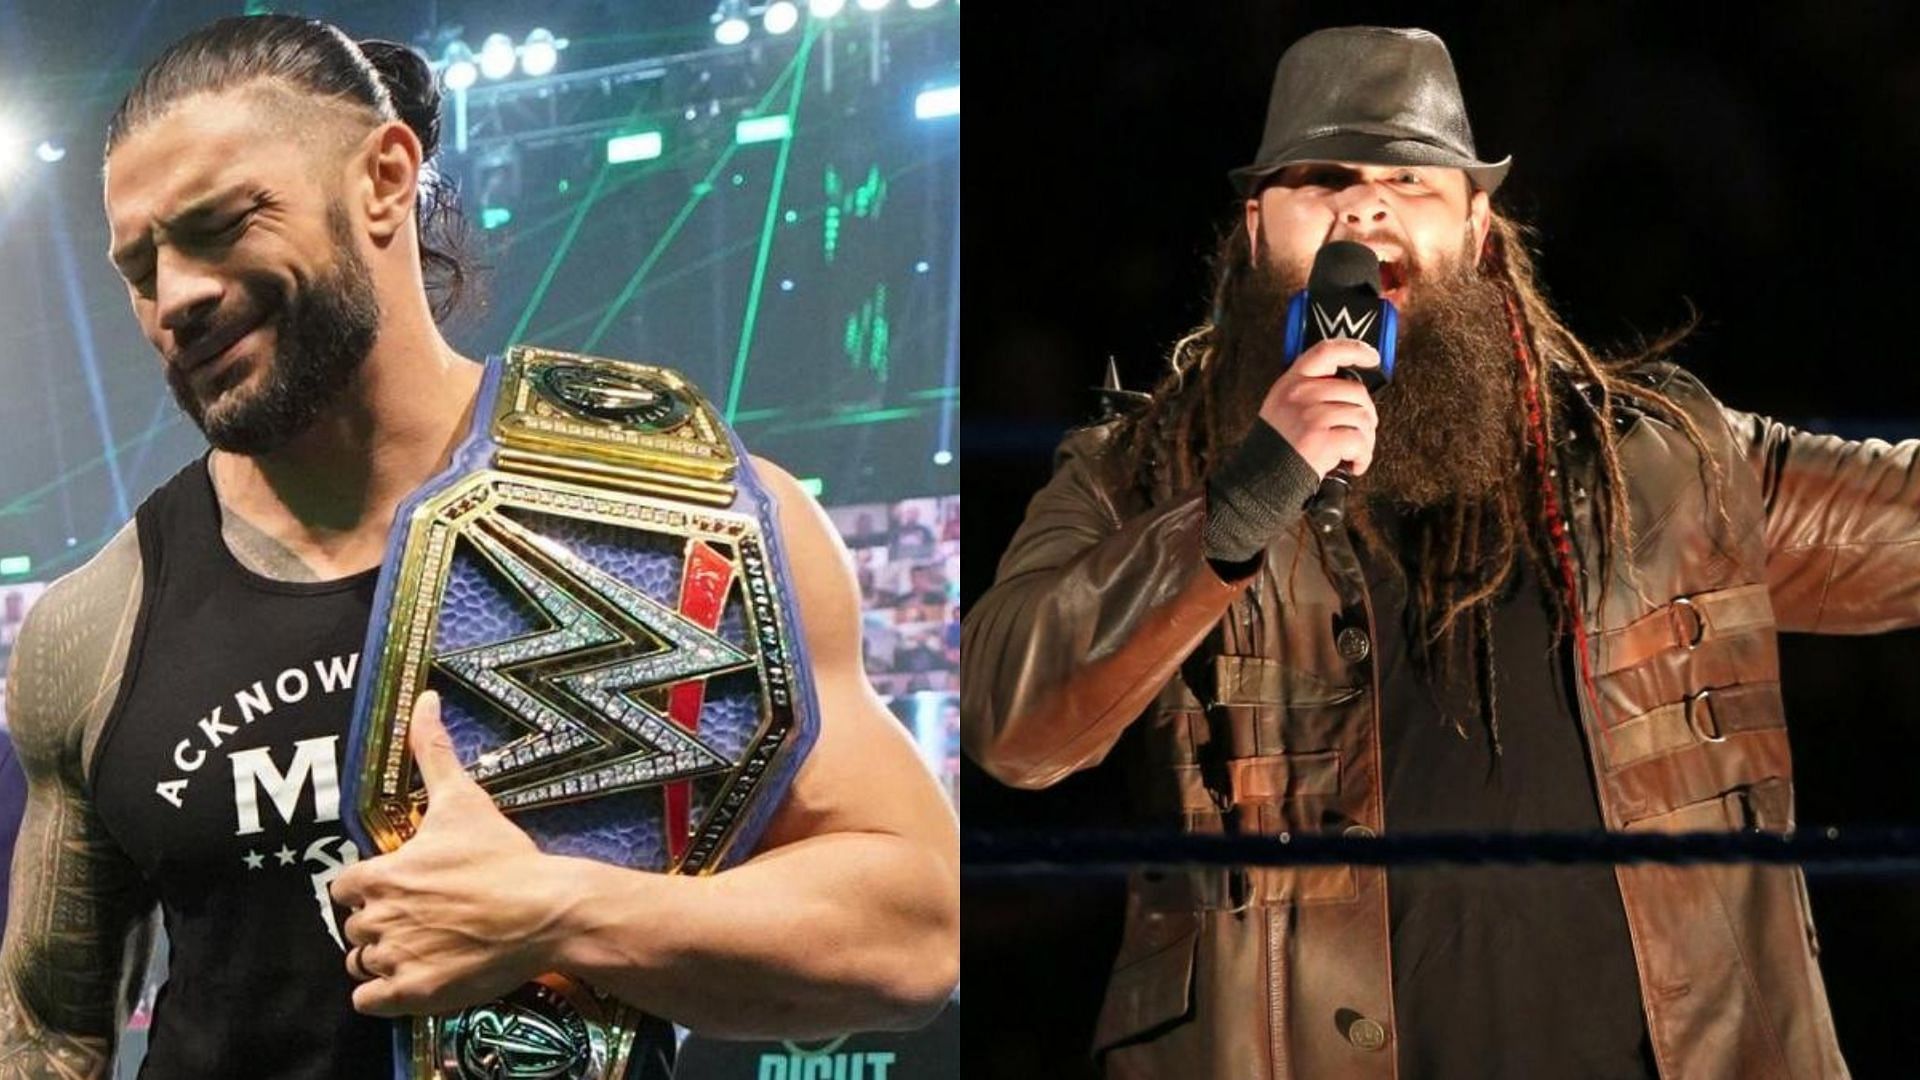 Could Bray Wyatt be the one to dethrone Roman Reigns?